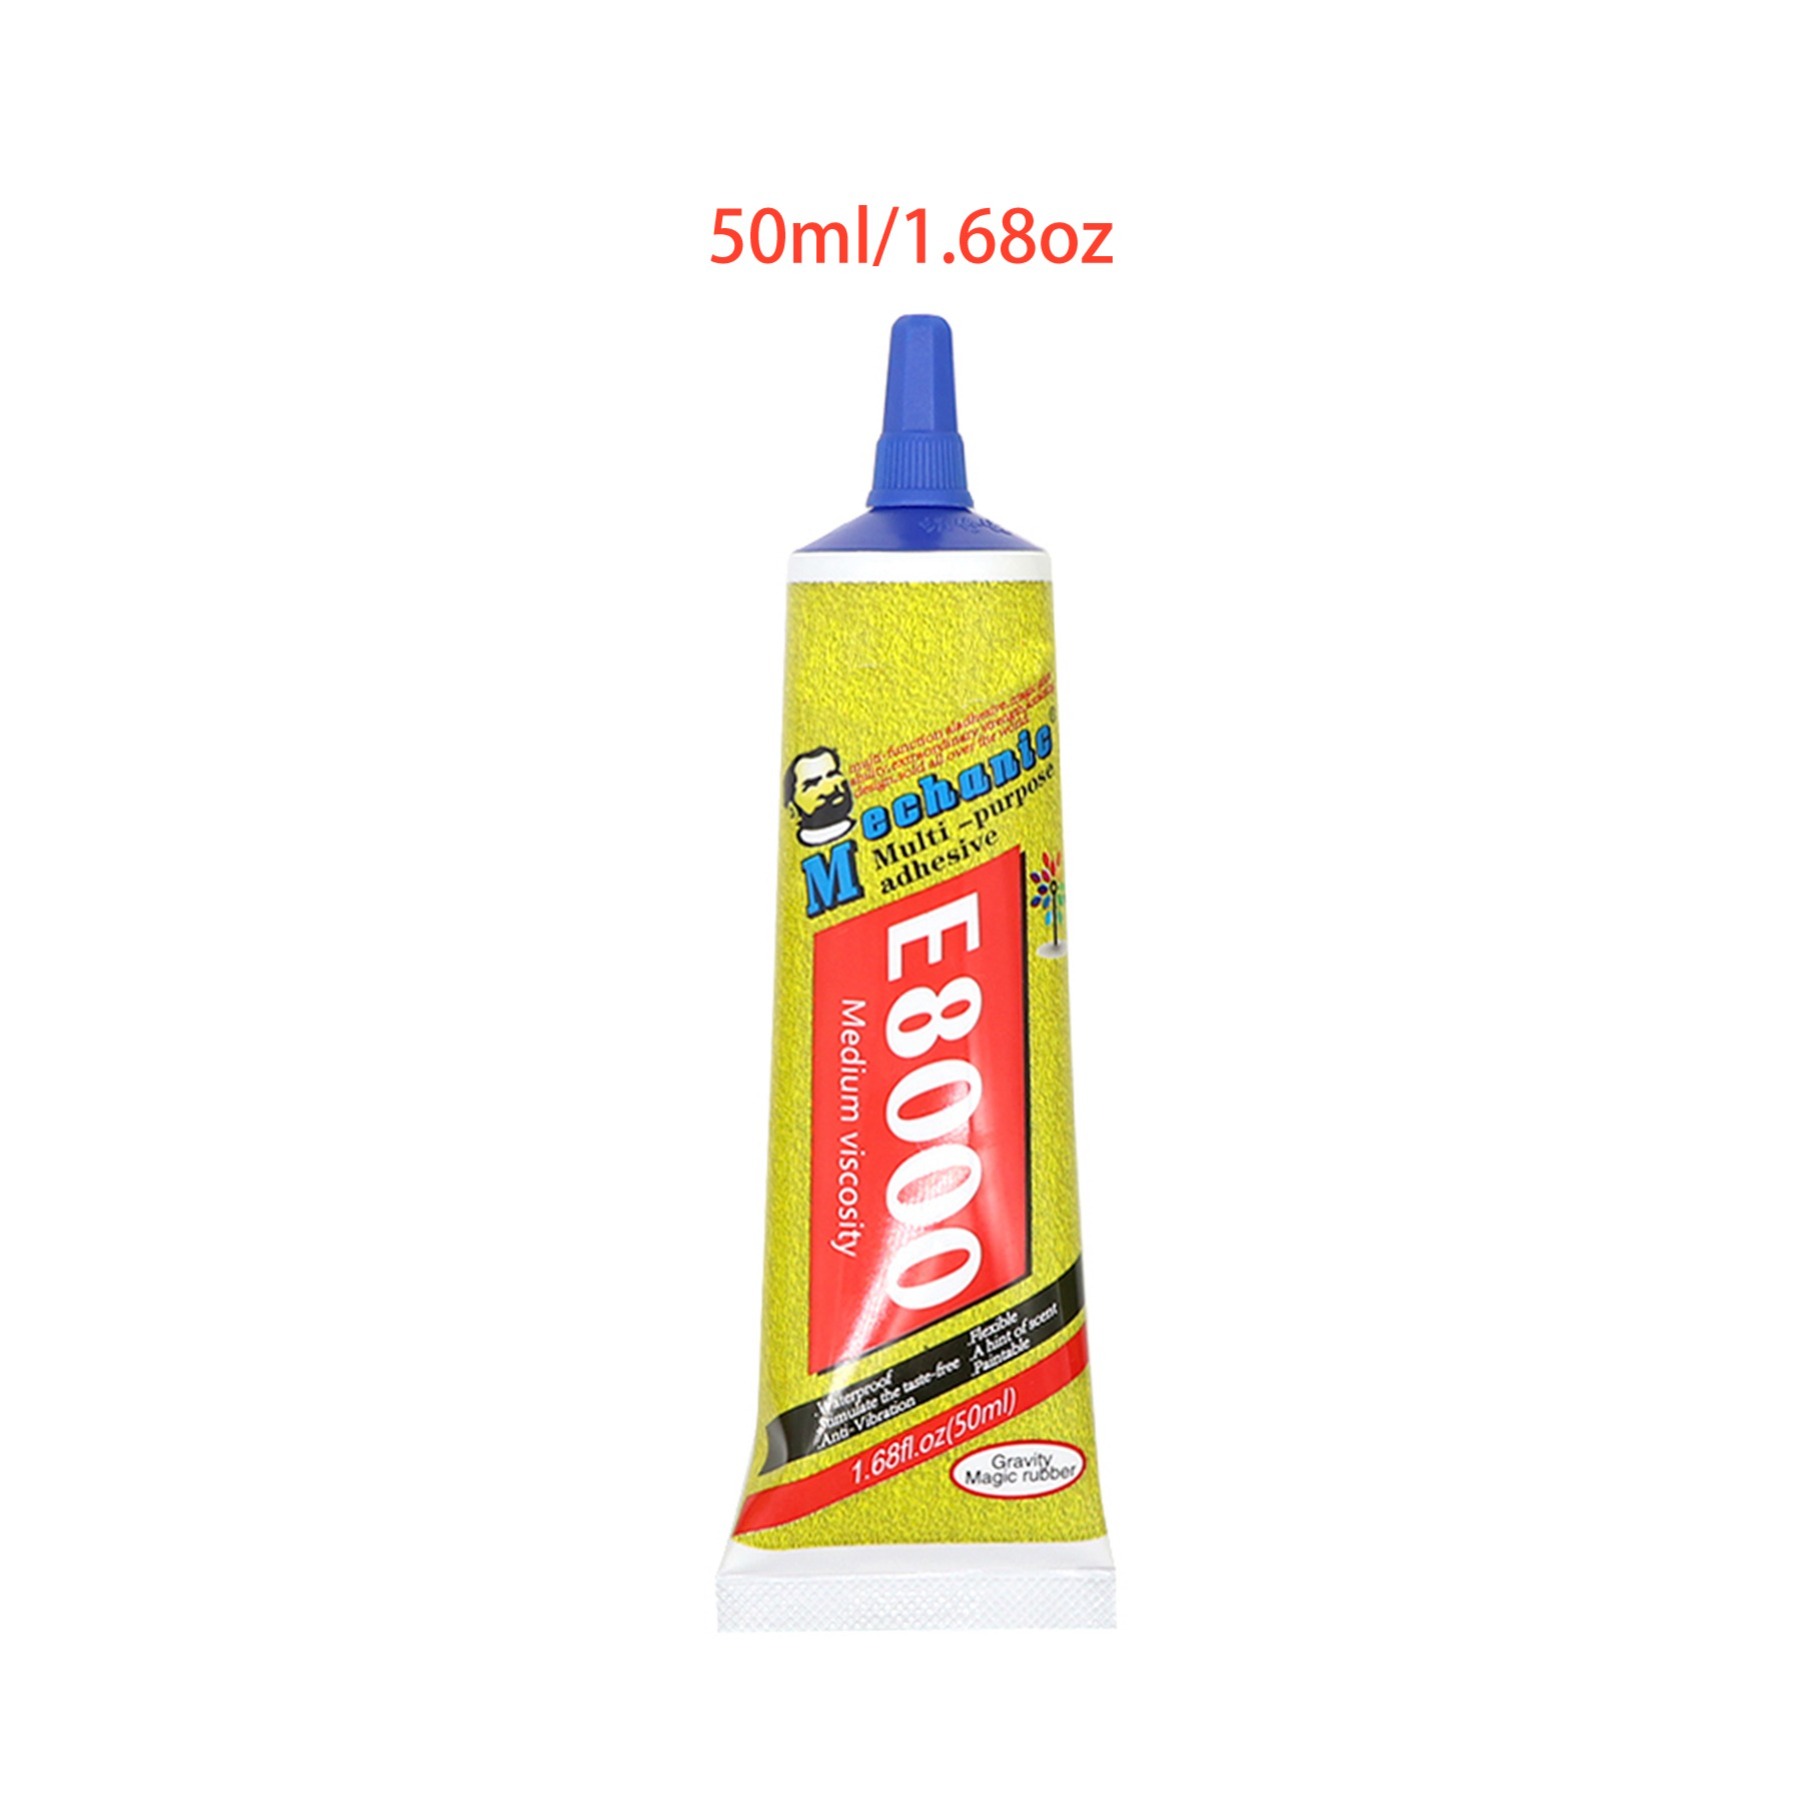  ZUKPUMNE E8000 Craft and Jewelry Bonding Adhesive, Special  Environmental Bonding Glue, Transparent Solution, Room Temperature Curing,  Easy to Operate, Anti-Vibration and Waterproof : Arts, Crafts & Sewing